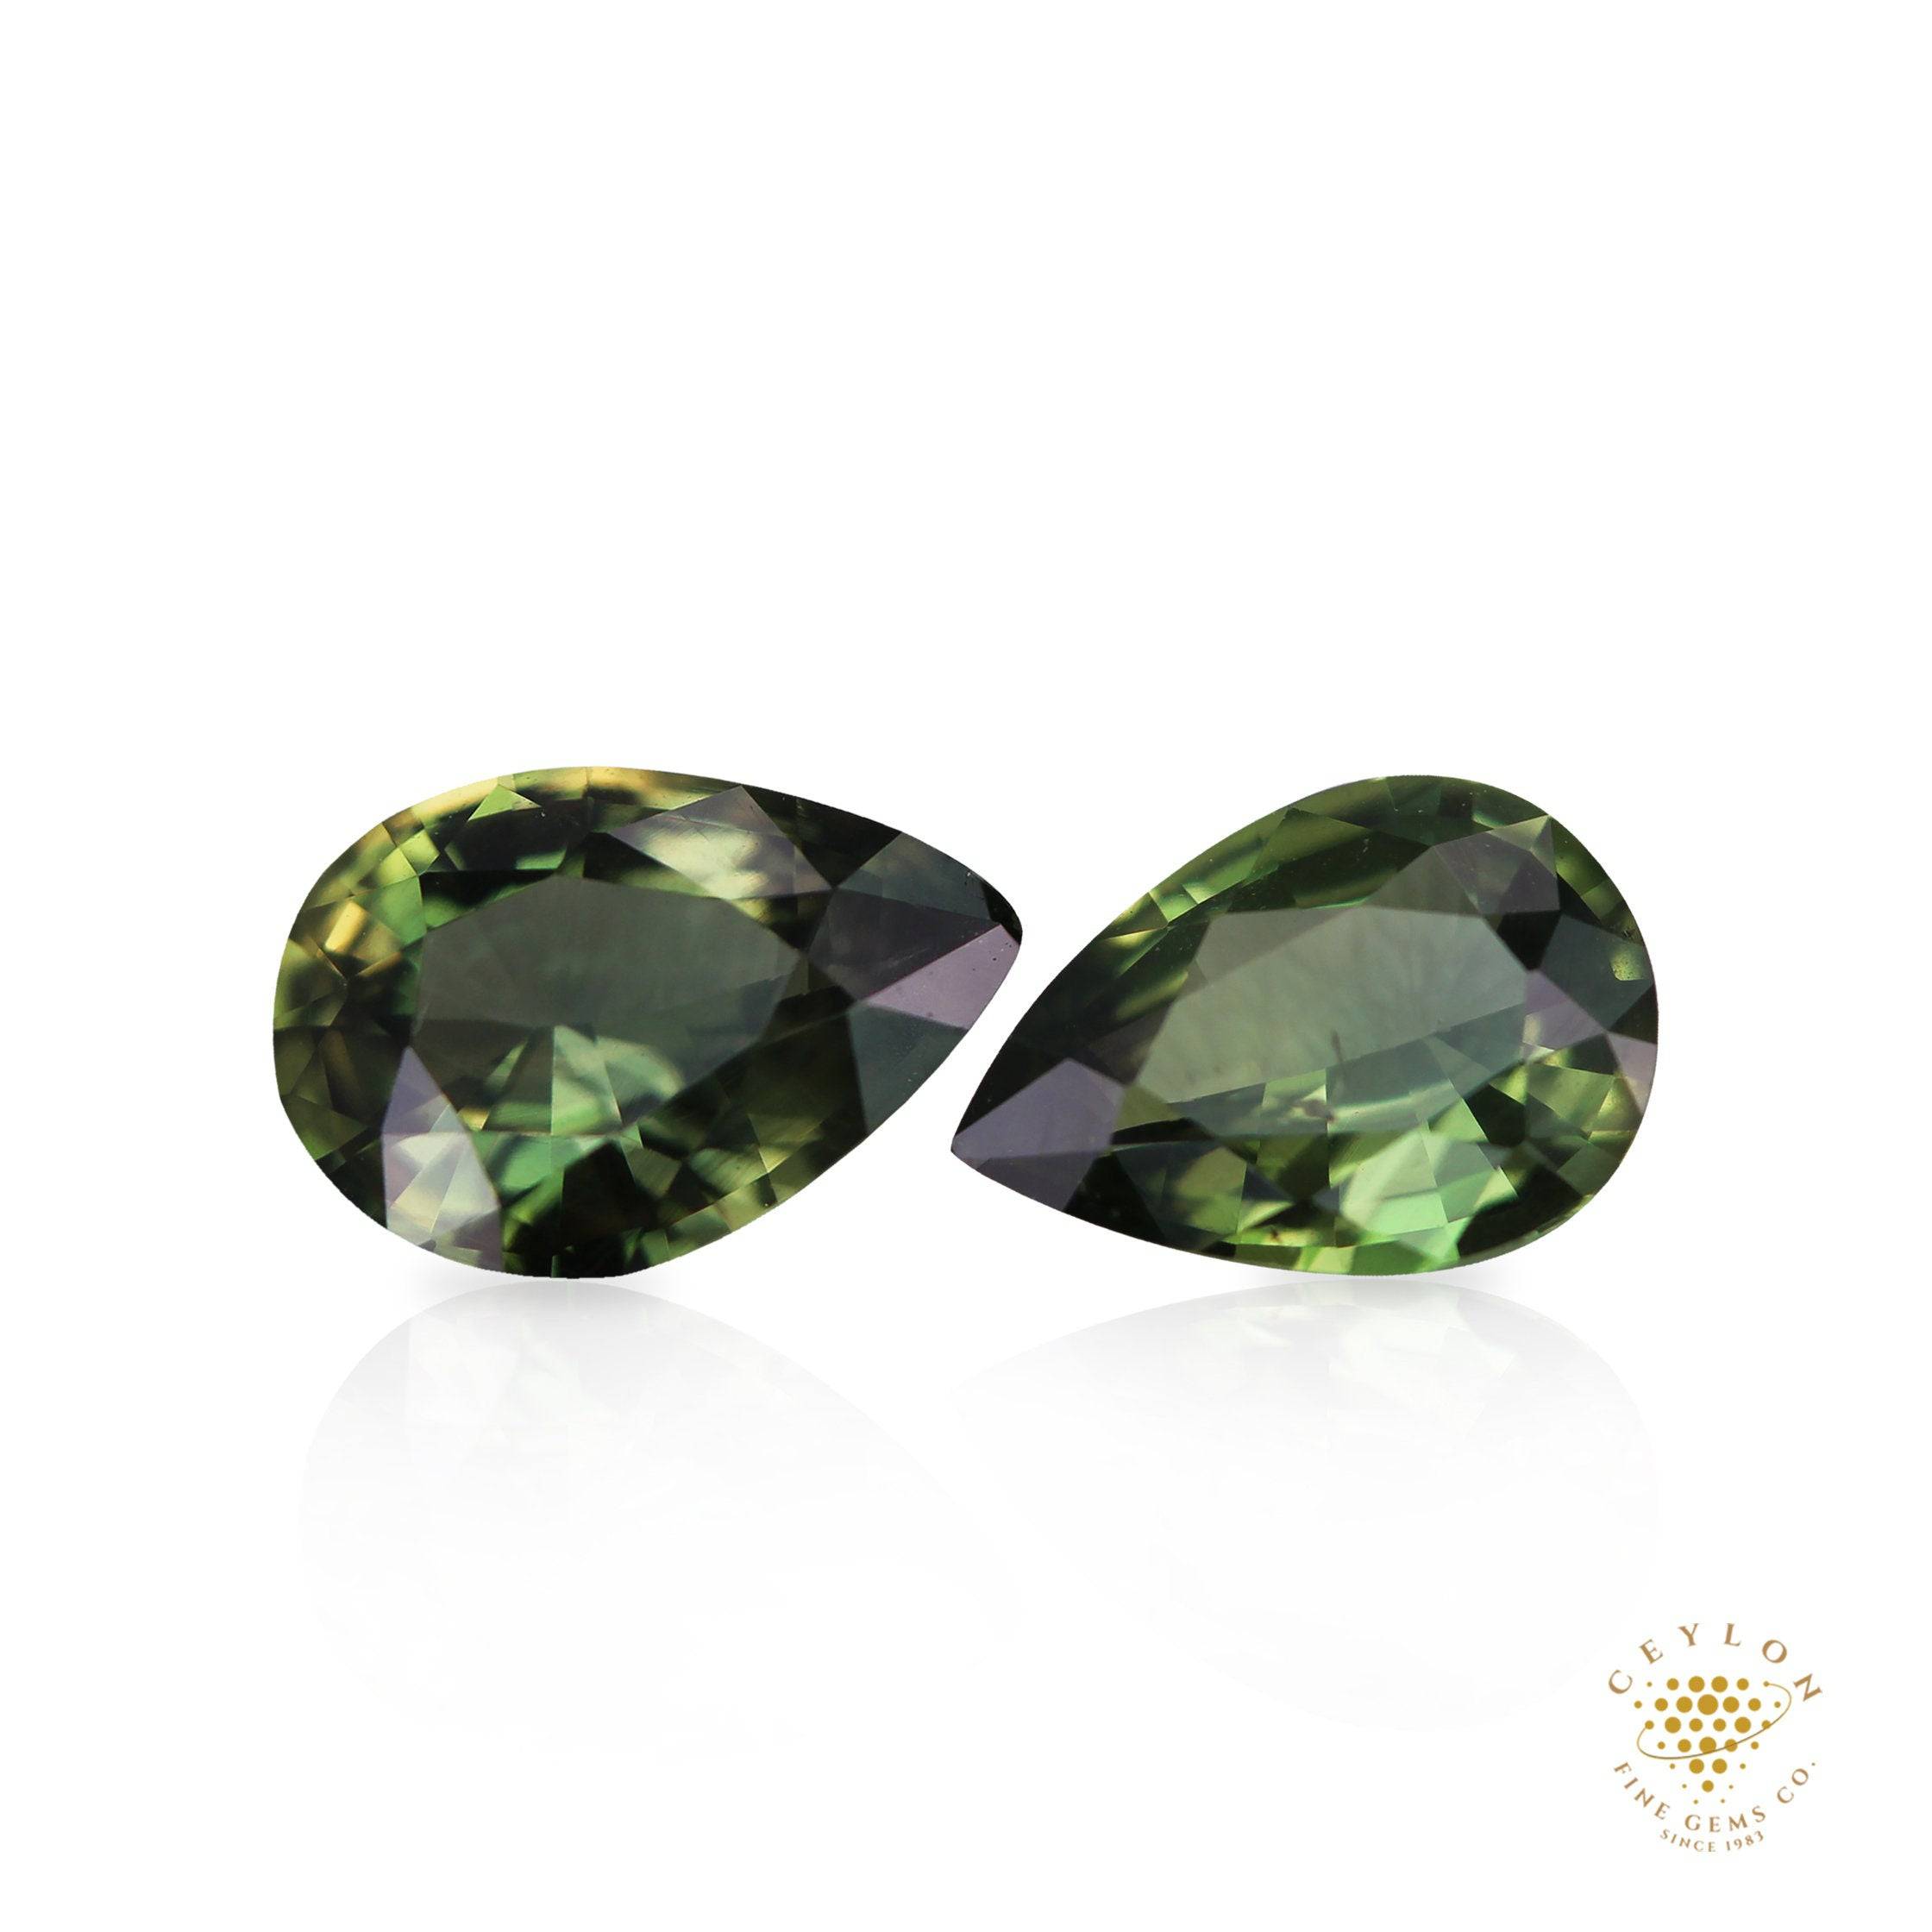 1.04 & 0.97 Cts Green Sapphire Pair - (UH) - Baza Boutique 